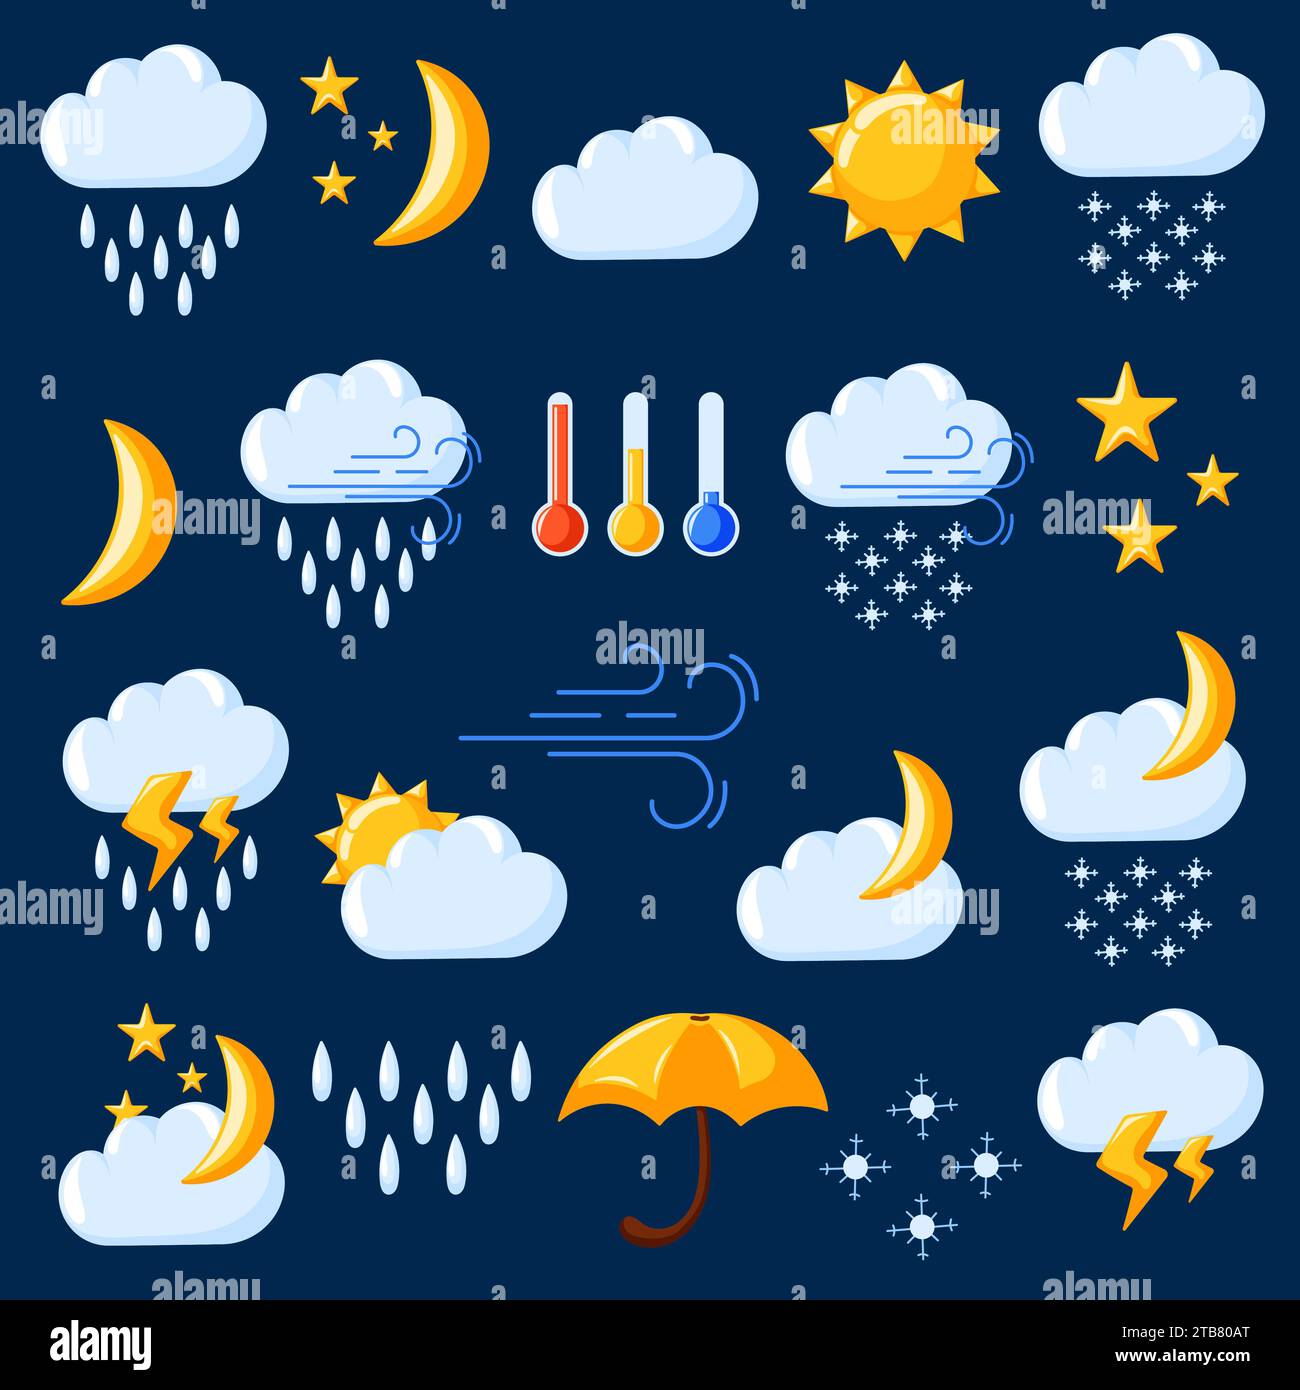 Weather symbols in cartoon style. Elements for weather forecast. Thunderstorm, lightning, rain, showers, cloud, drops, wind, cold and warm thermometer Stock Vector